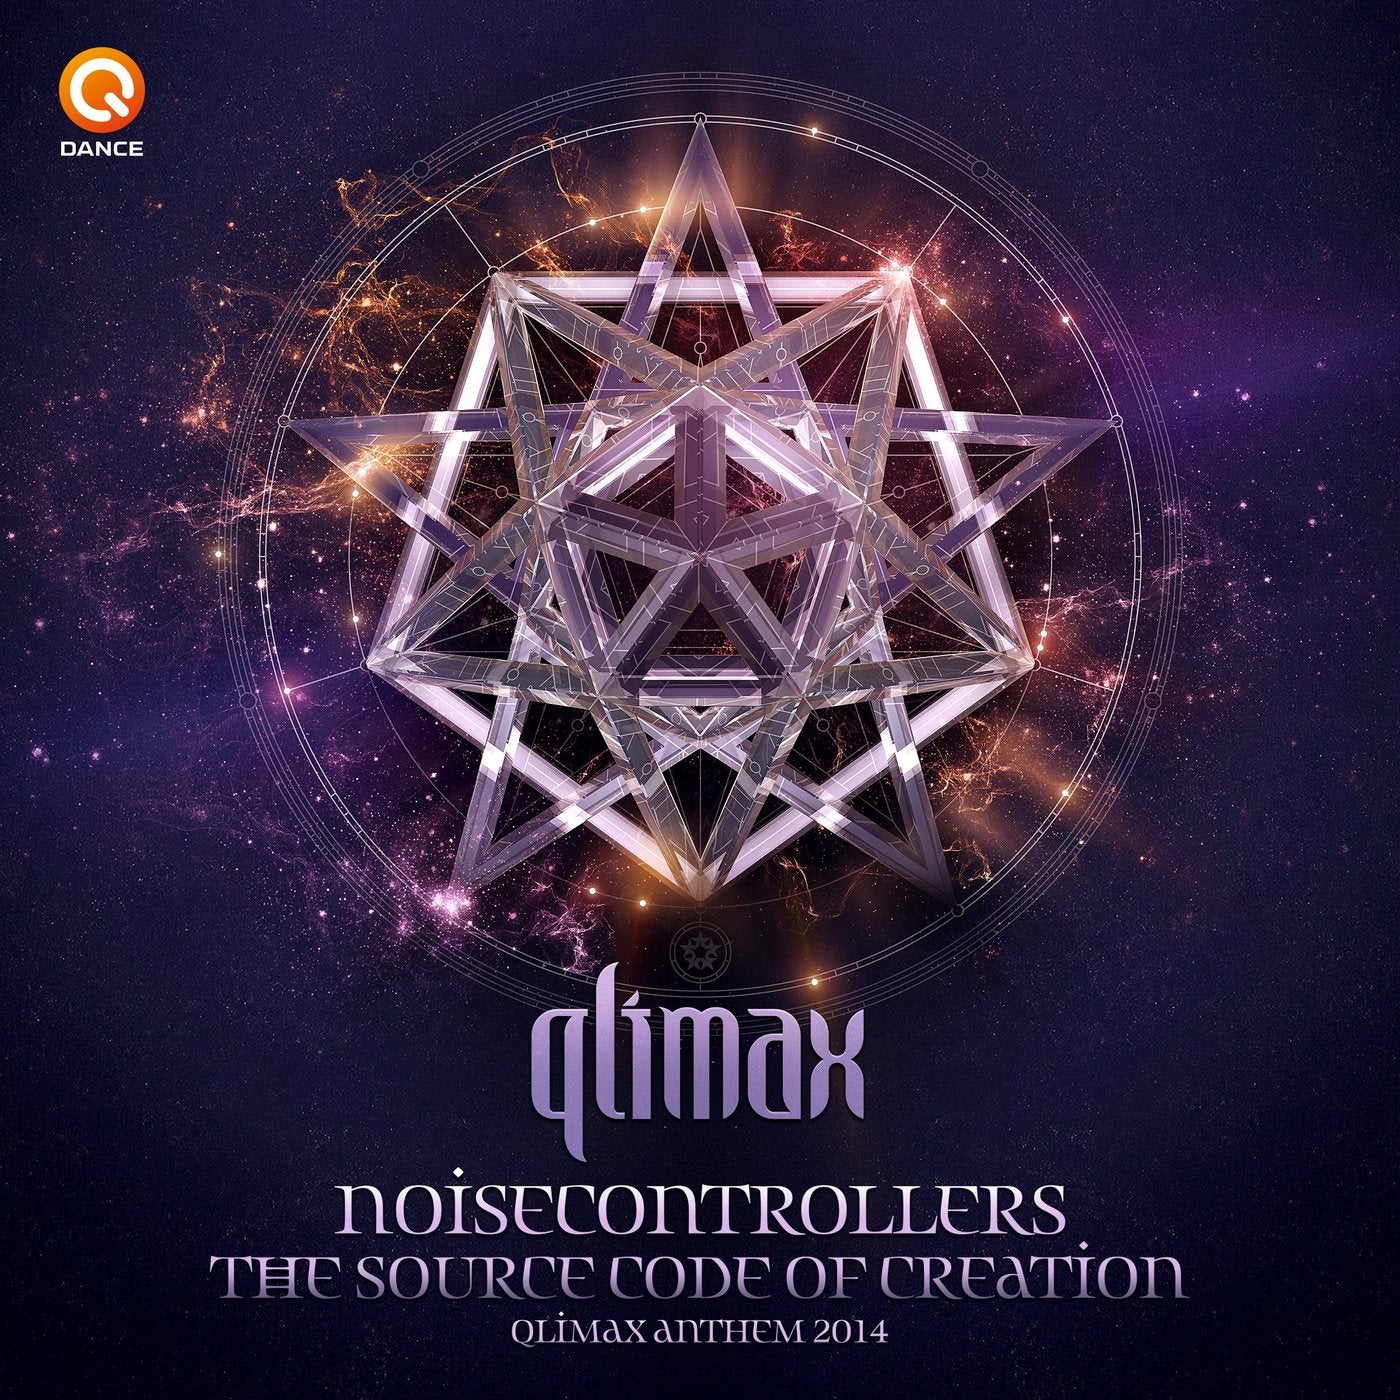 The Source Code Of Creation (Qlimax Anthem 2014)